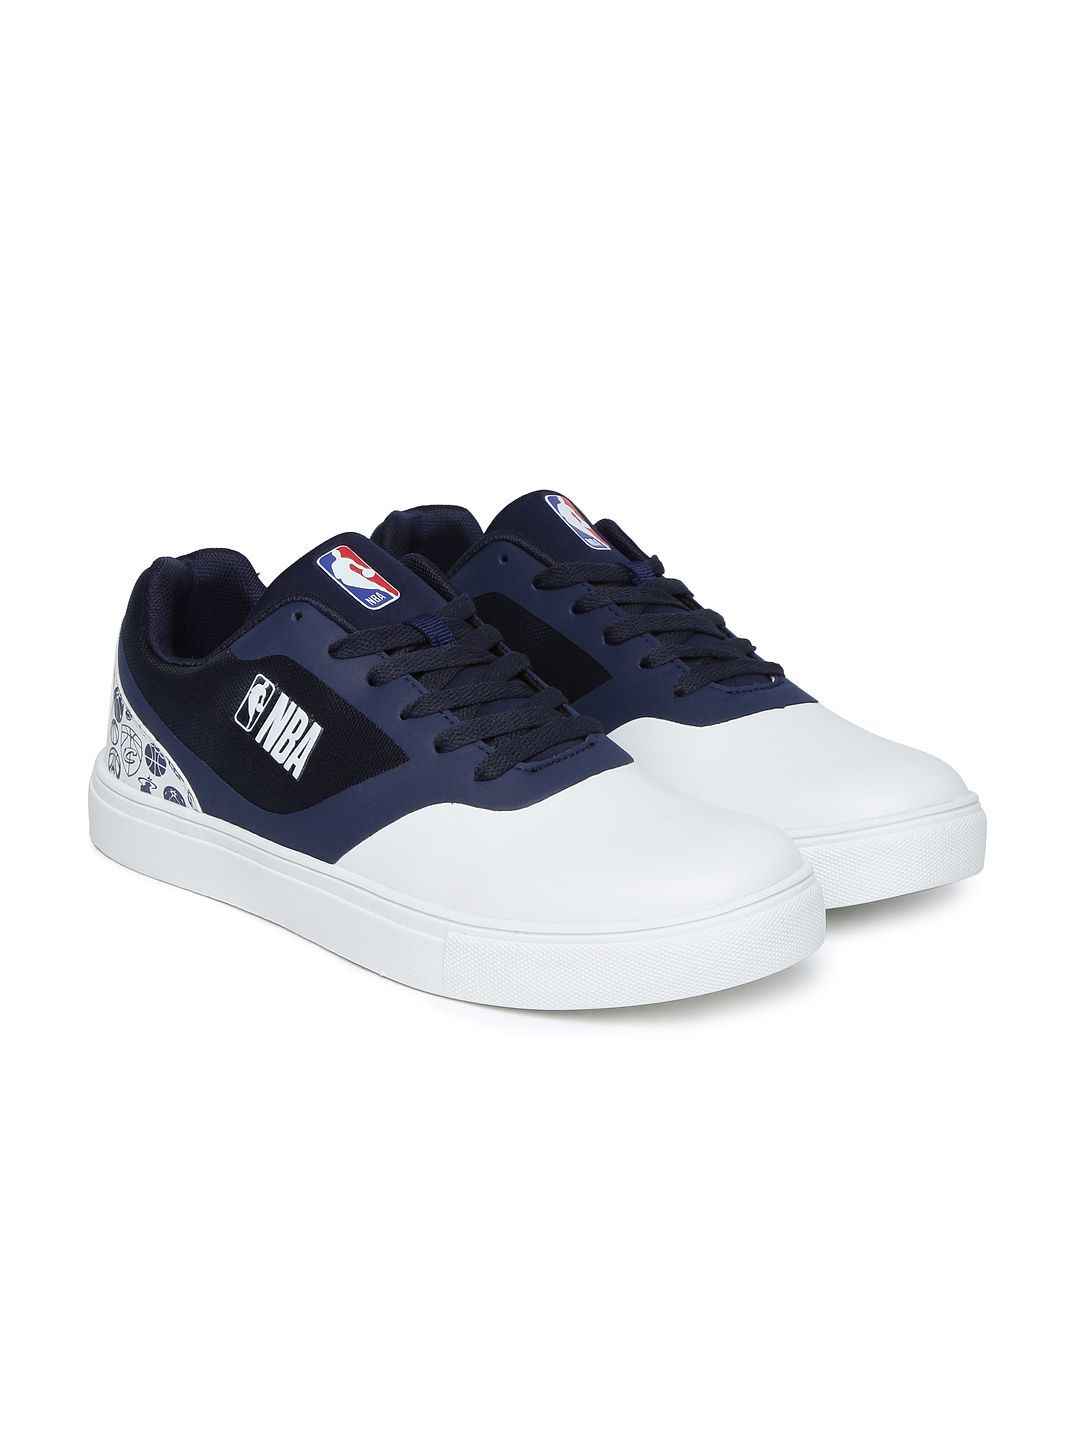 NBA Sneakers Navy Casual Shoes - Buy 